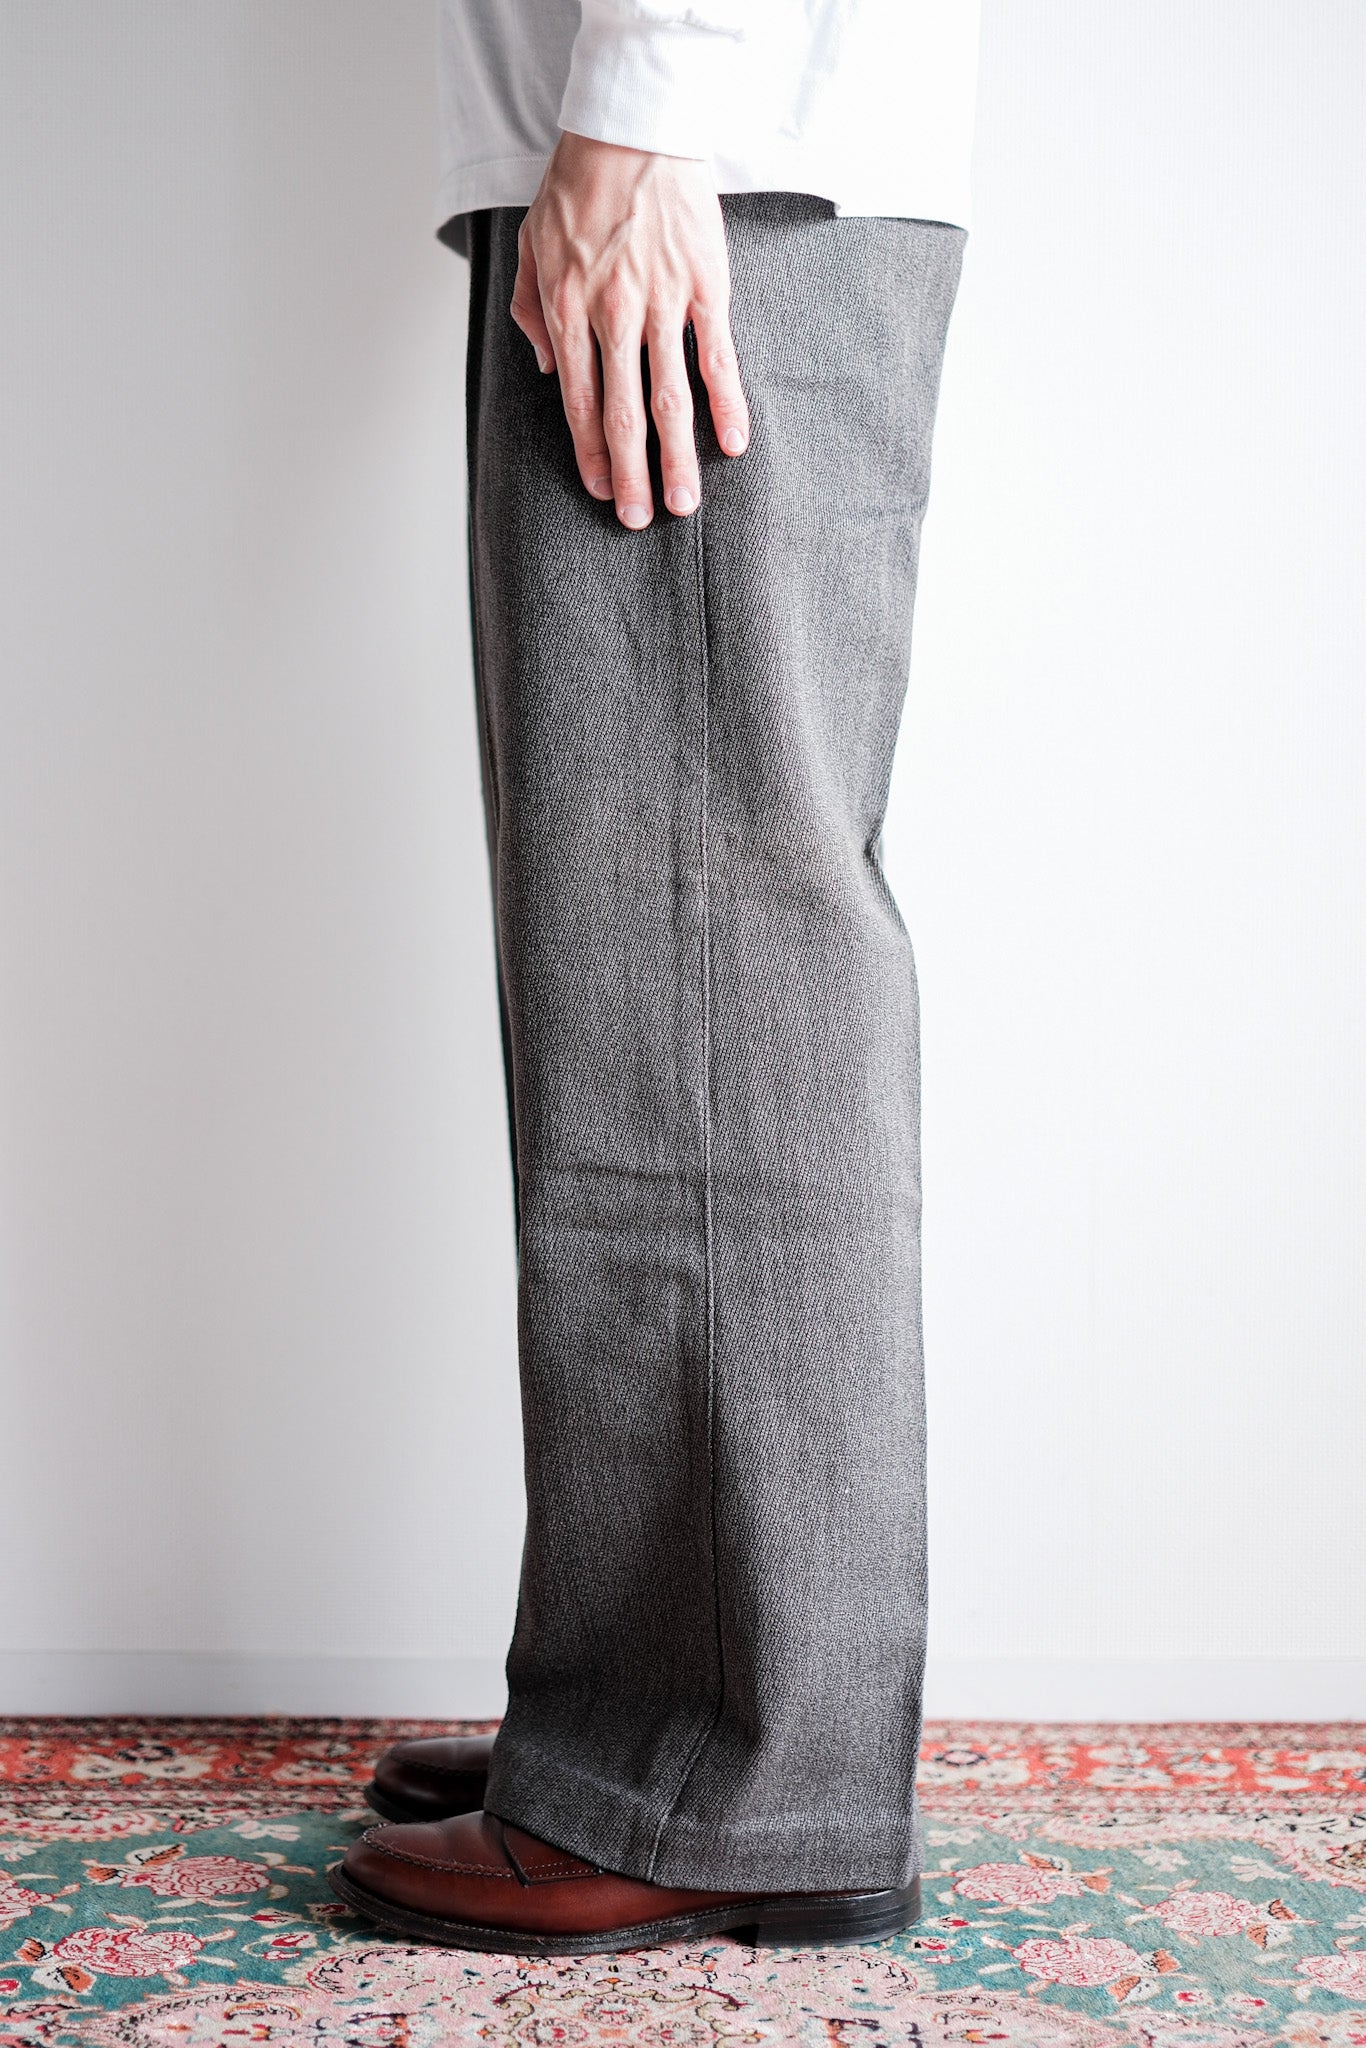 【~30's】French Vintage Salt & Pepper Cotton Twill Work Pants "Dead Stock"